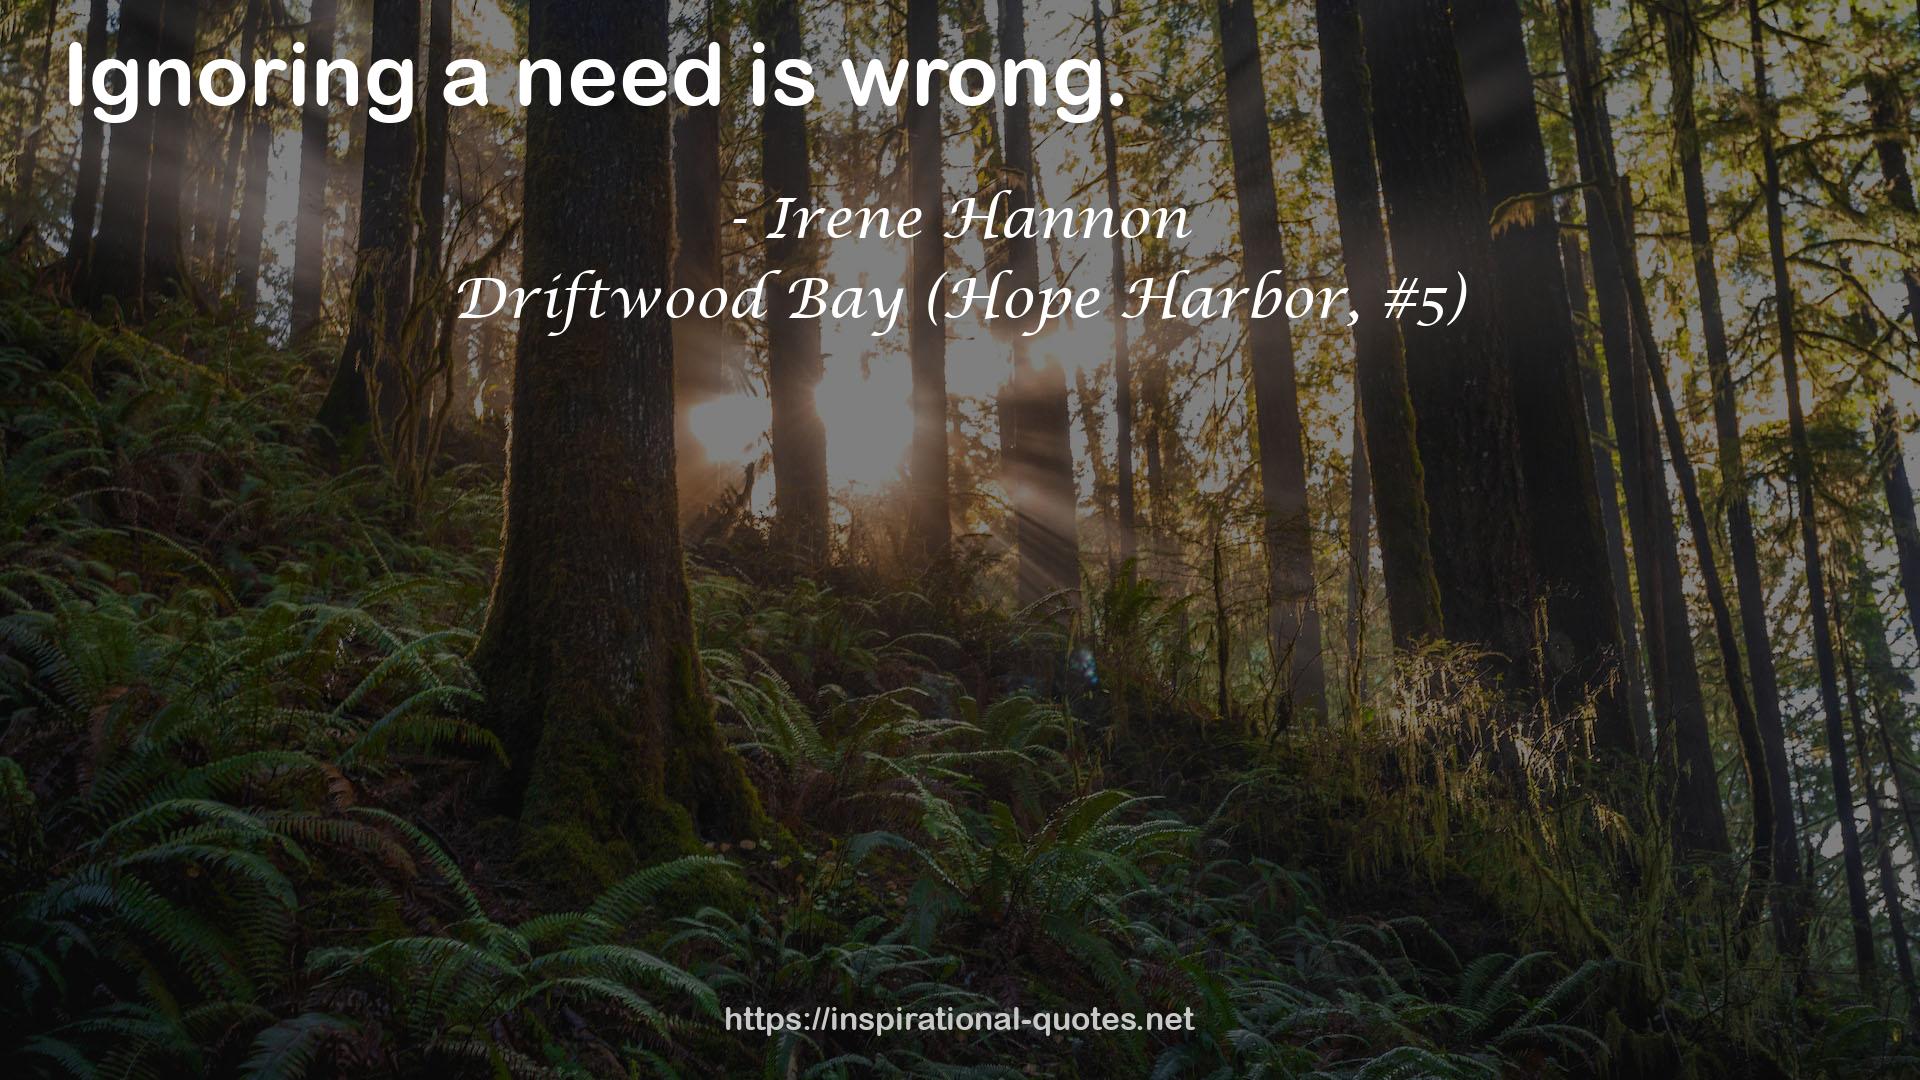 Driftwood Bay (Hope Harbor, #5) QUOTES